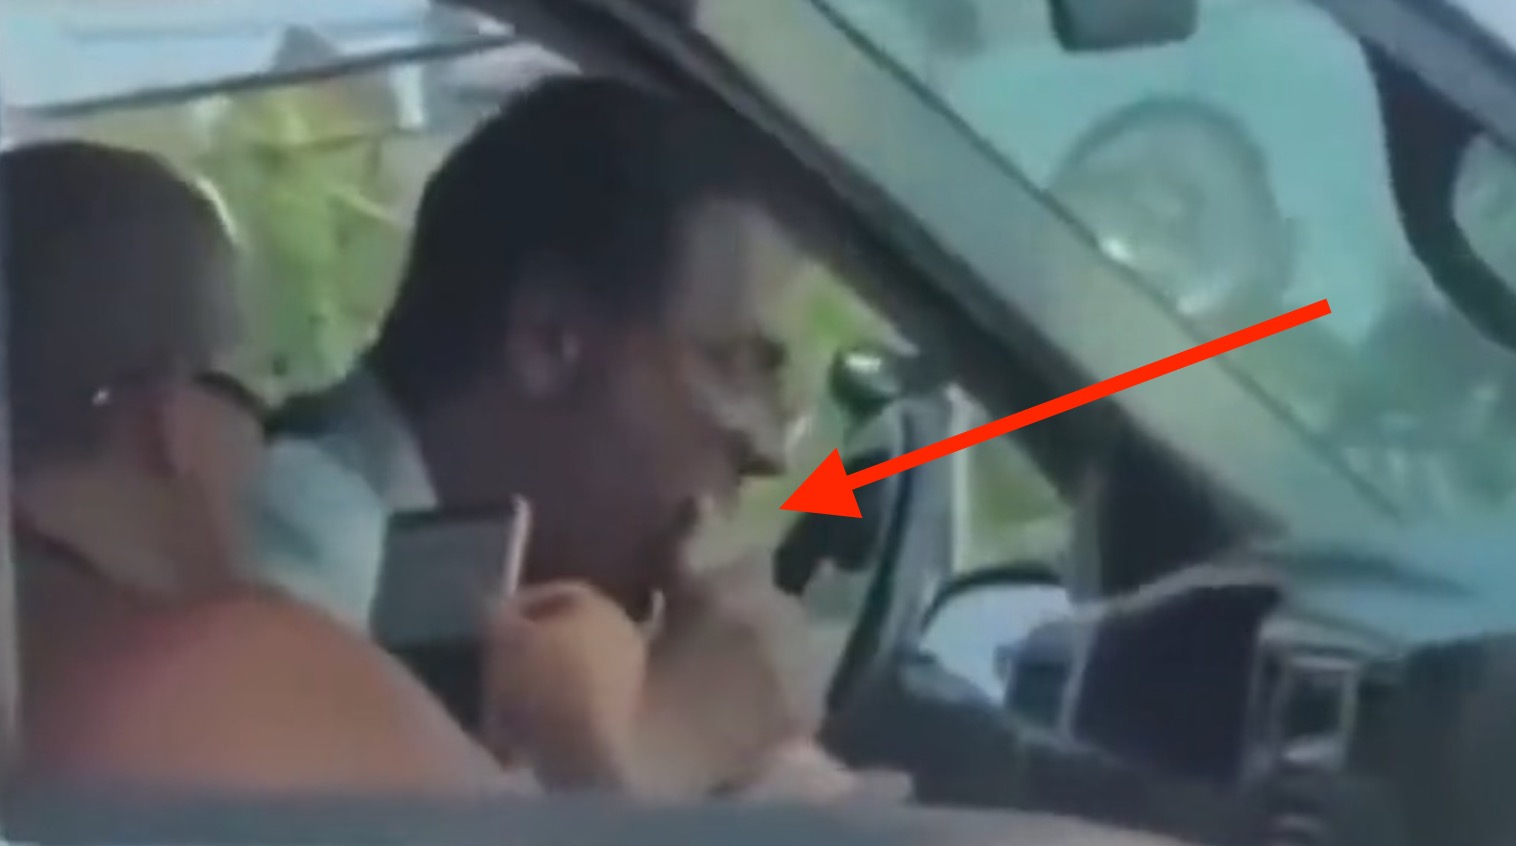 Man Caught on Camera Eating Female's Toes in Traffic - Watch Video